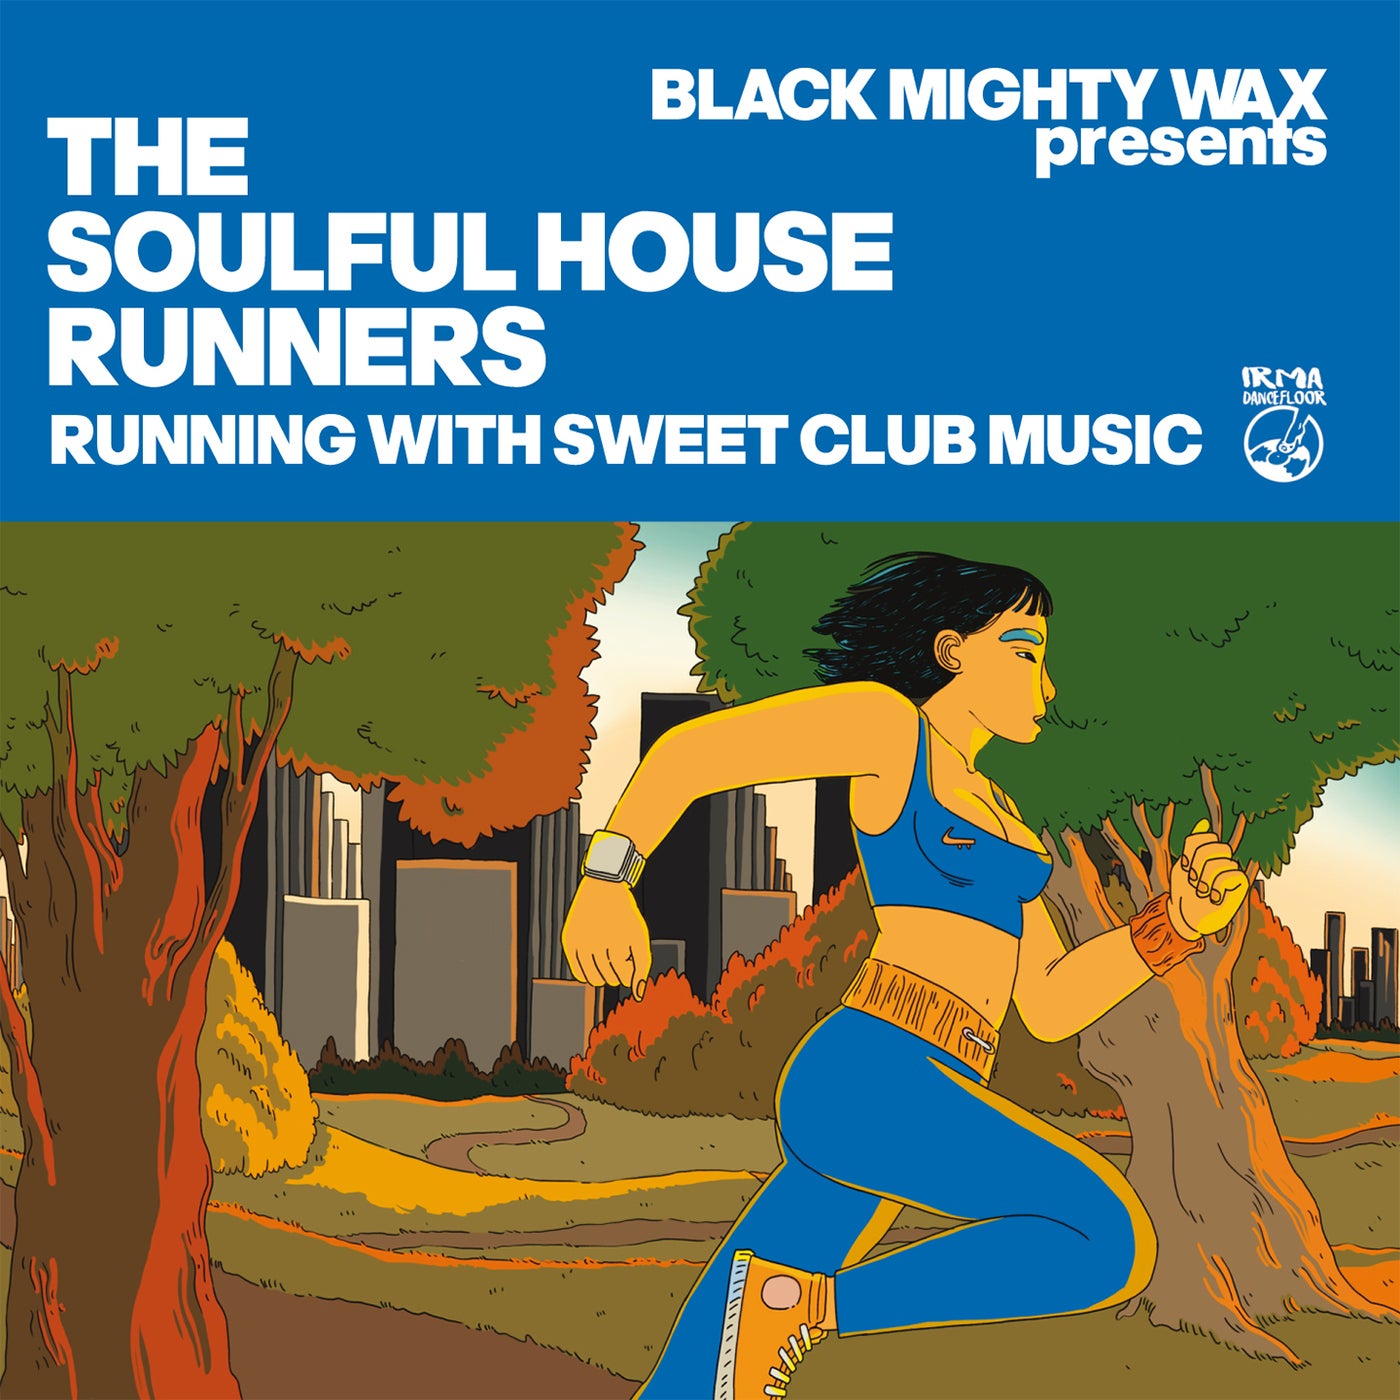 Black Mighty Wax presents The Soulful House Runners - Running With Sweet Club Music